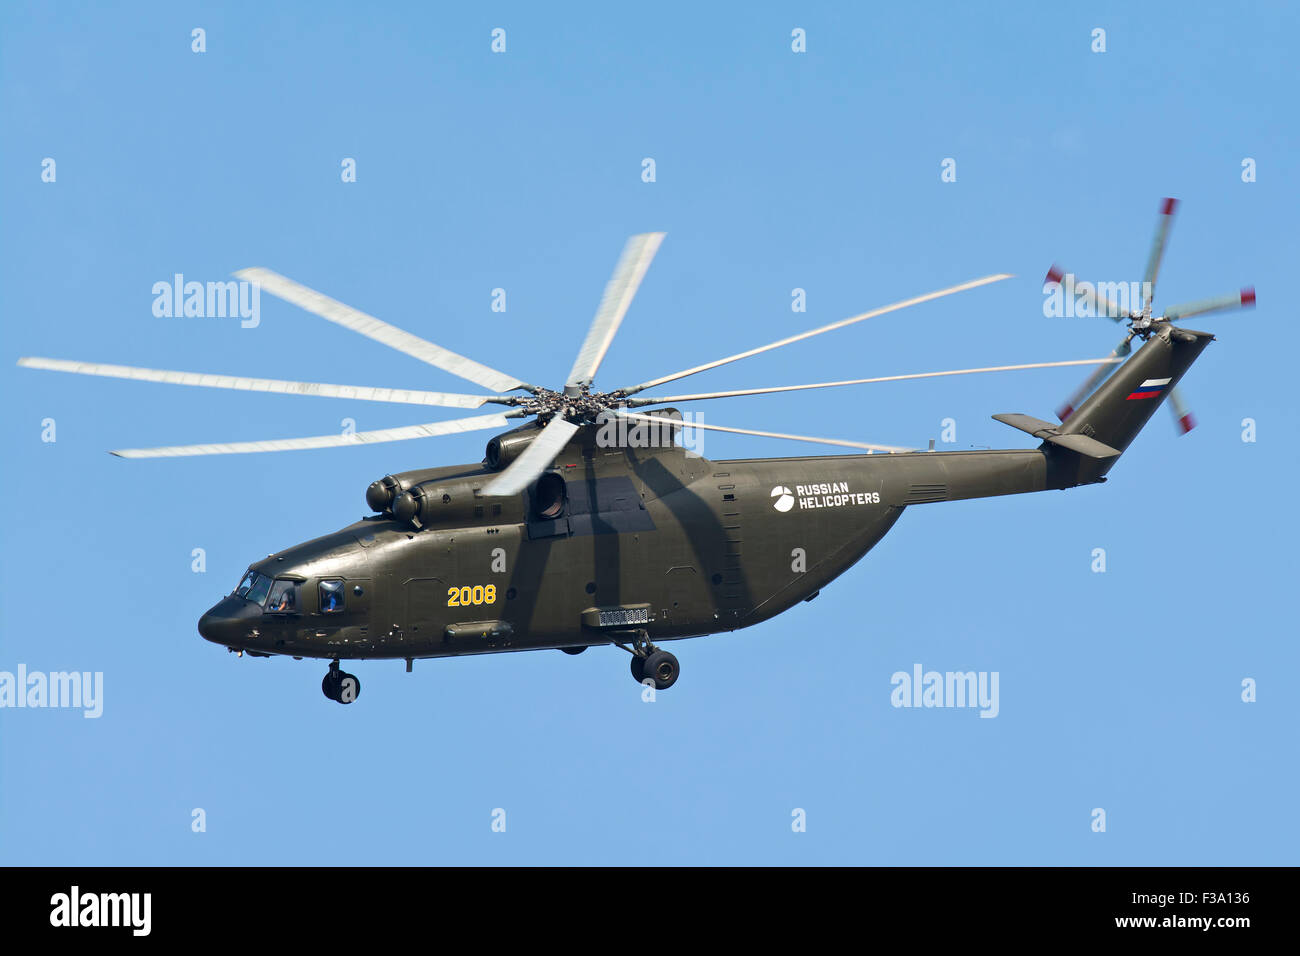 The Mil Mi-26 cargo helicopter performing during the Aviation Salon MAKS-2015 airshow in Zhukovsky, Russia. Stock Photo